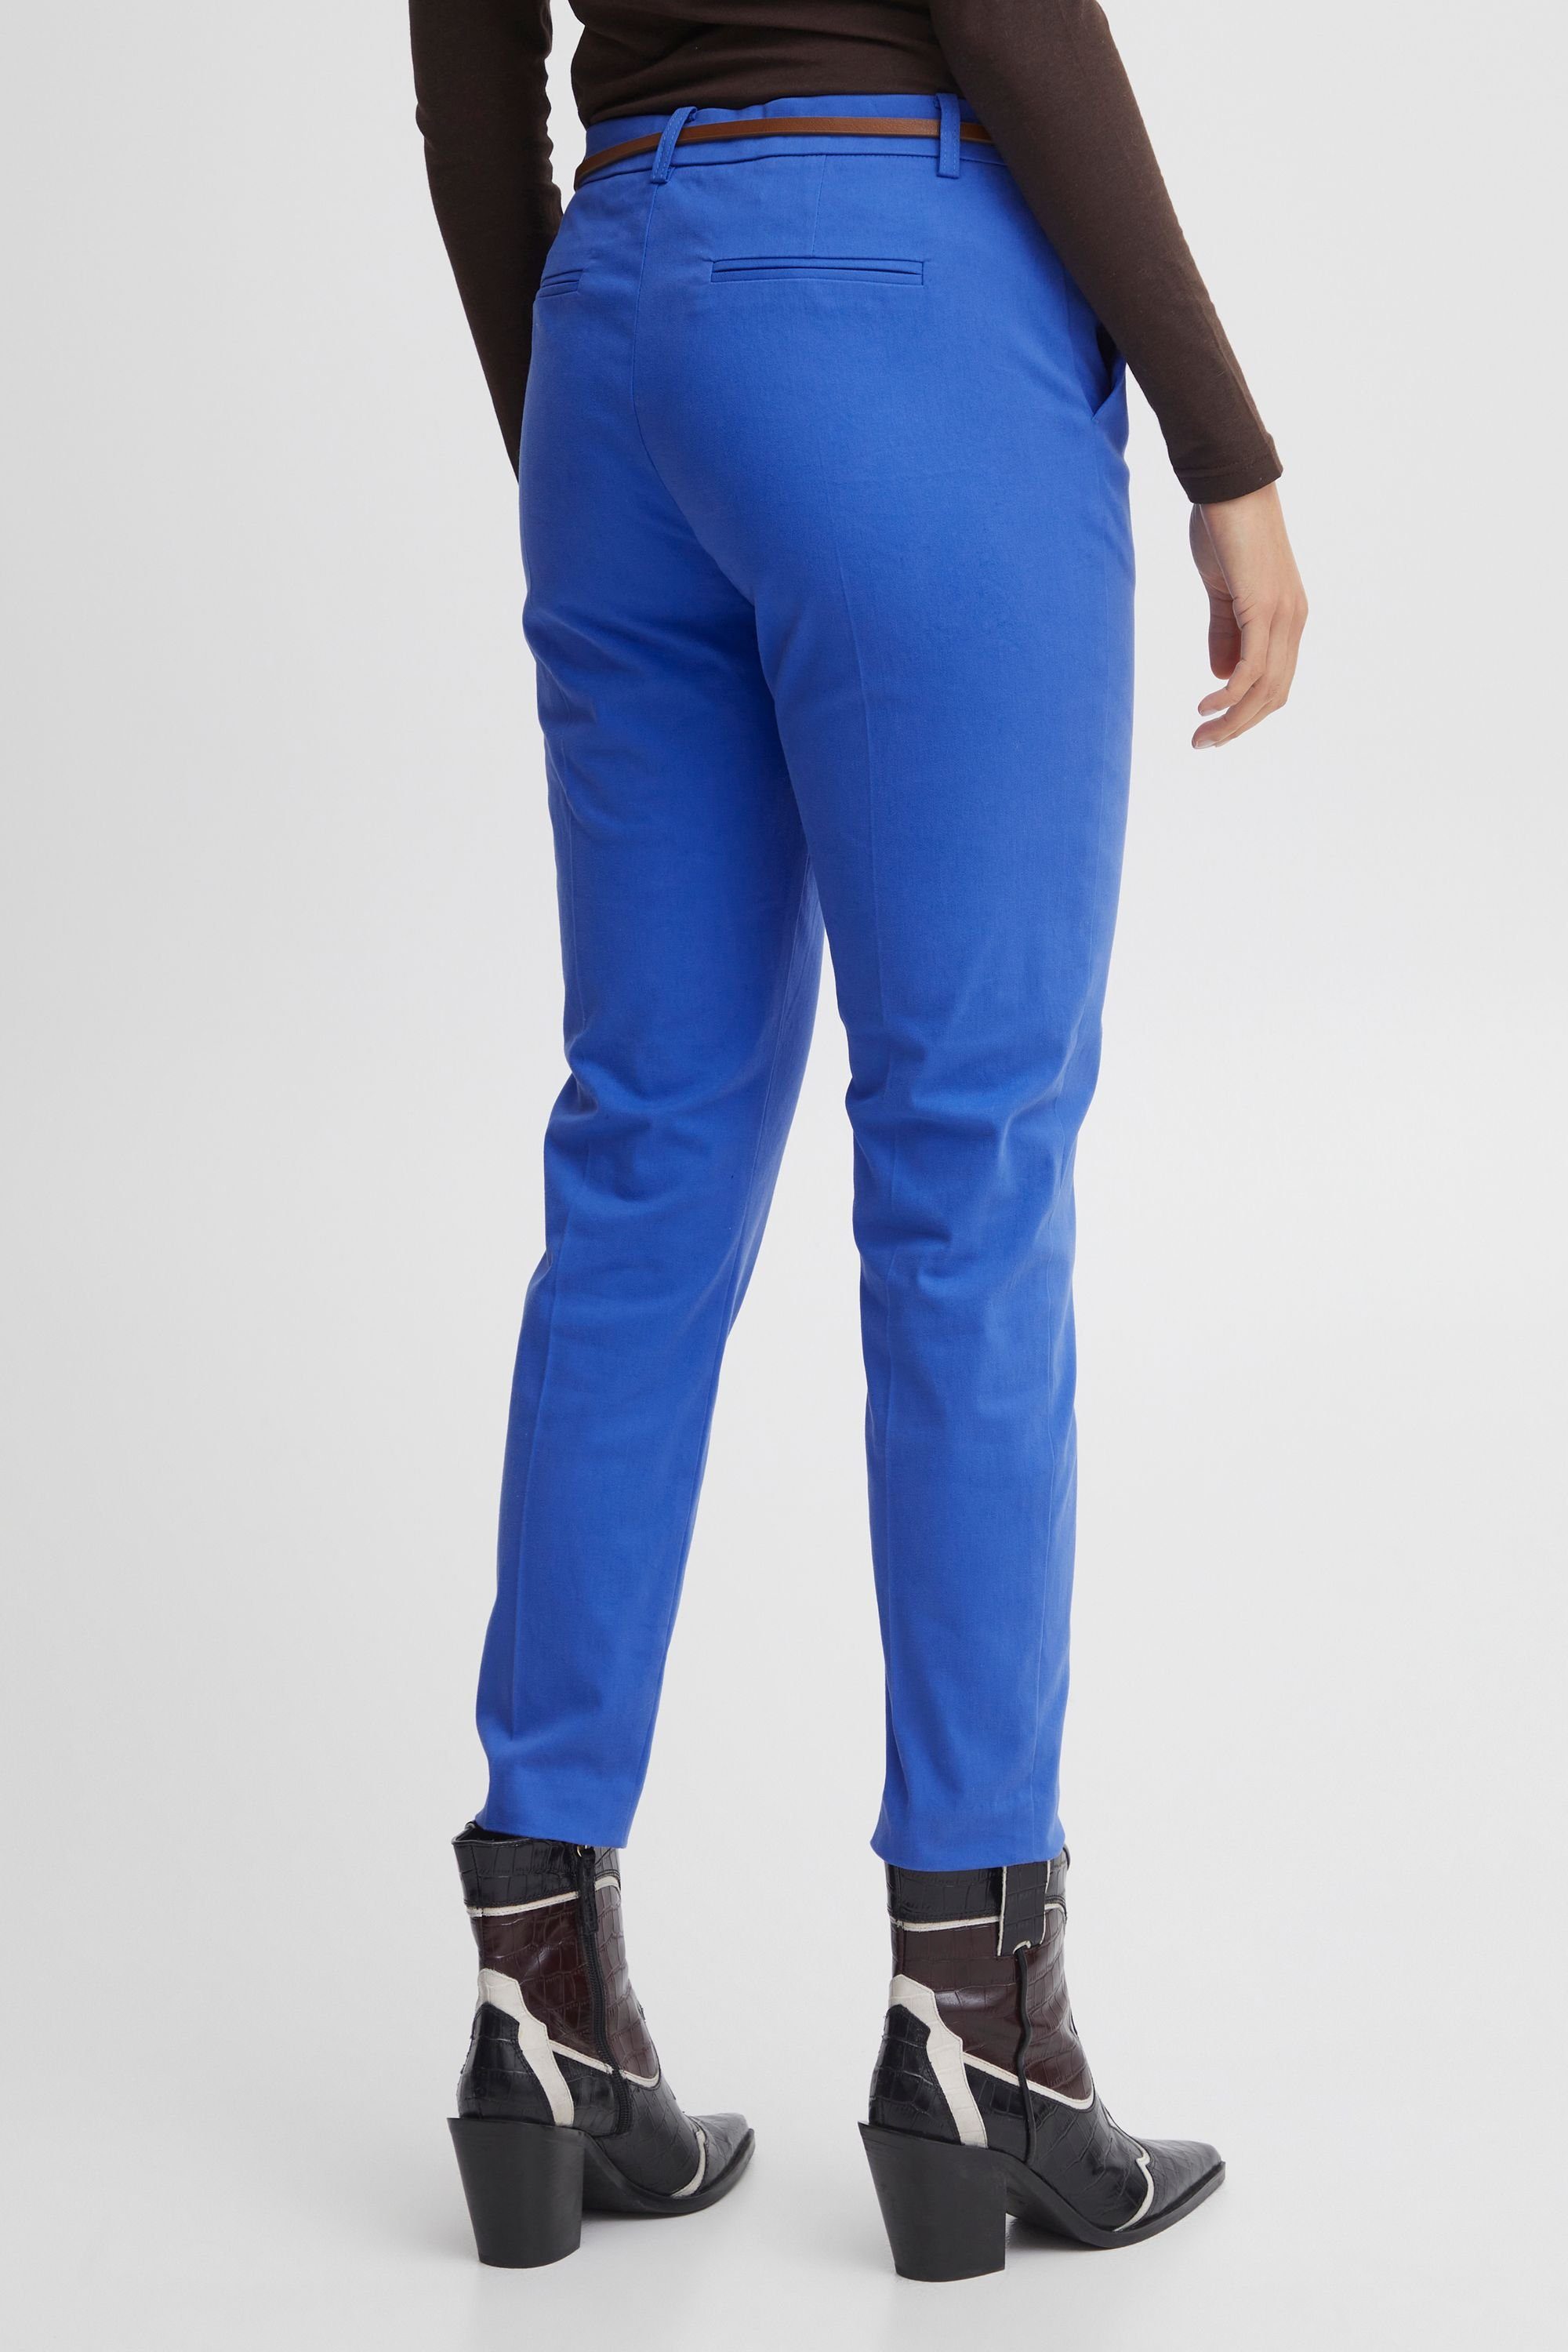 BYDays 20803473 cigaret Chinohose - Strong Blue pants 2 b.young (184051)